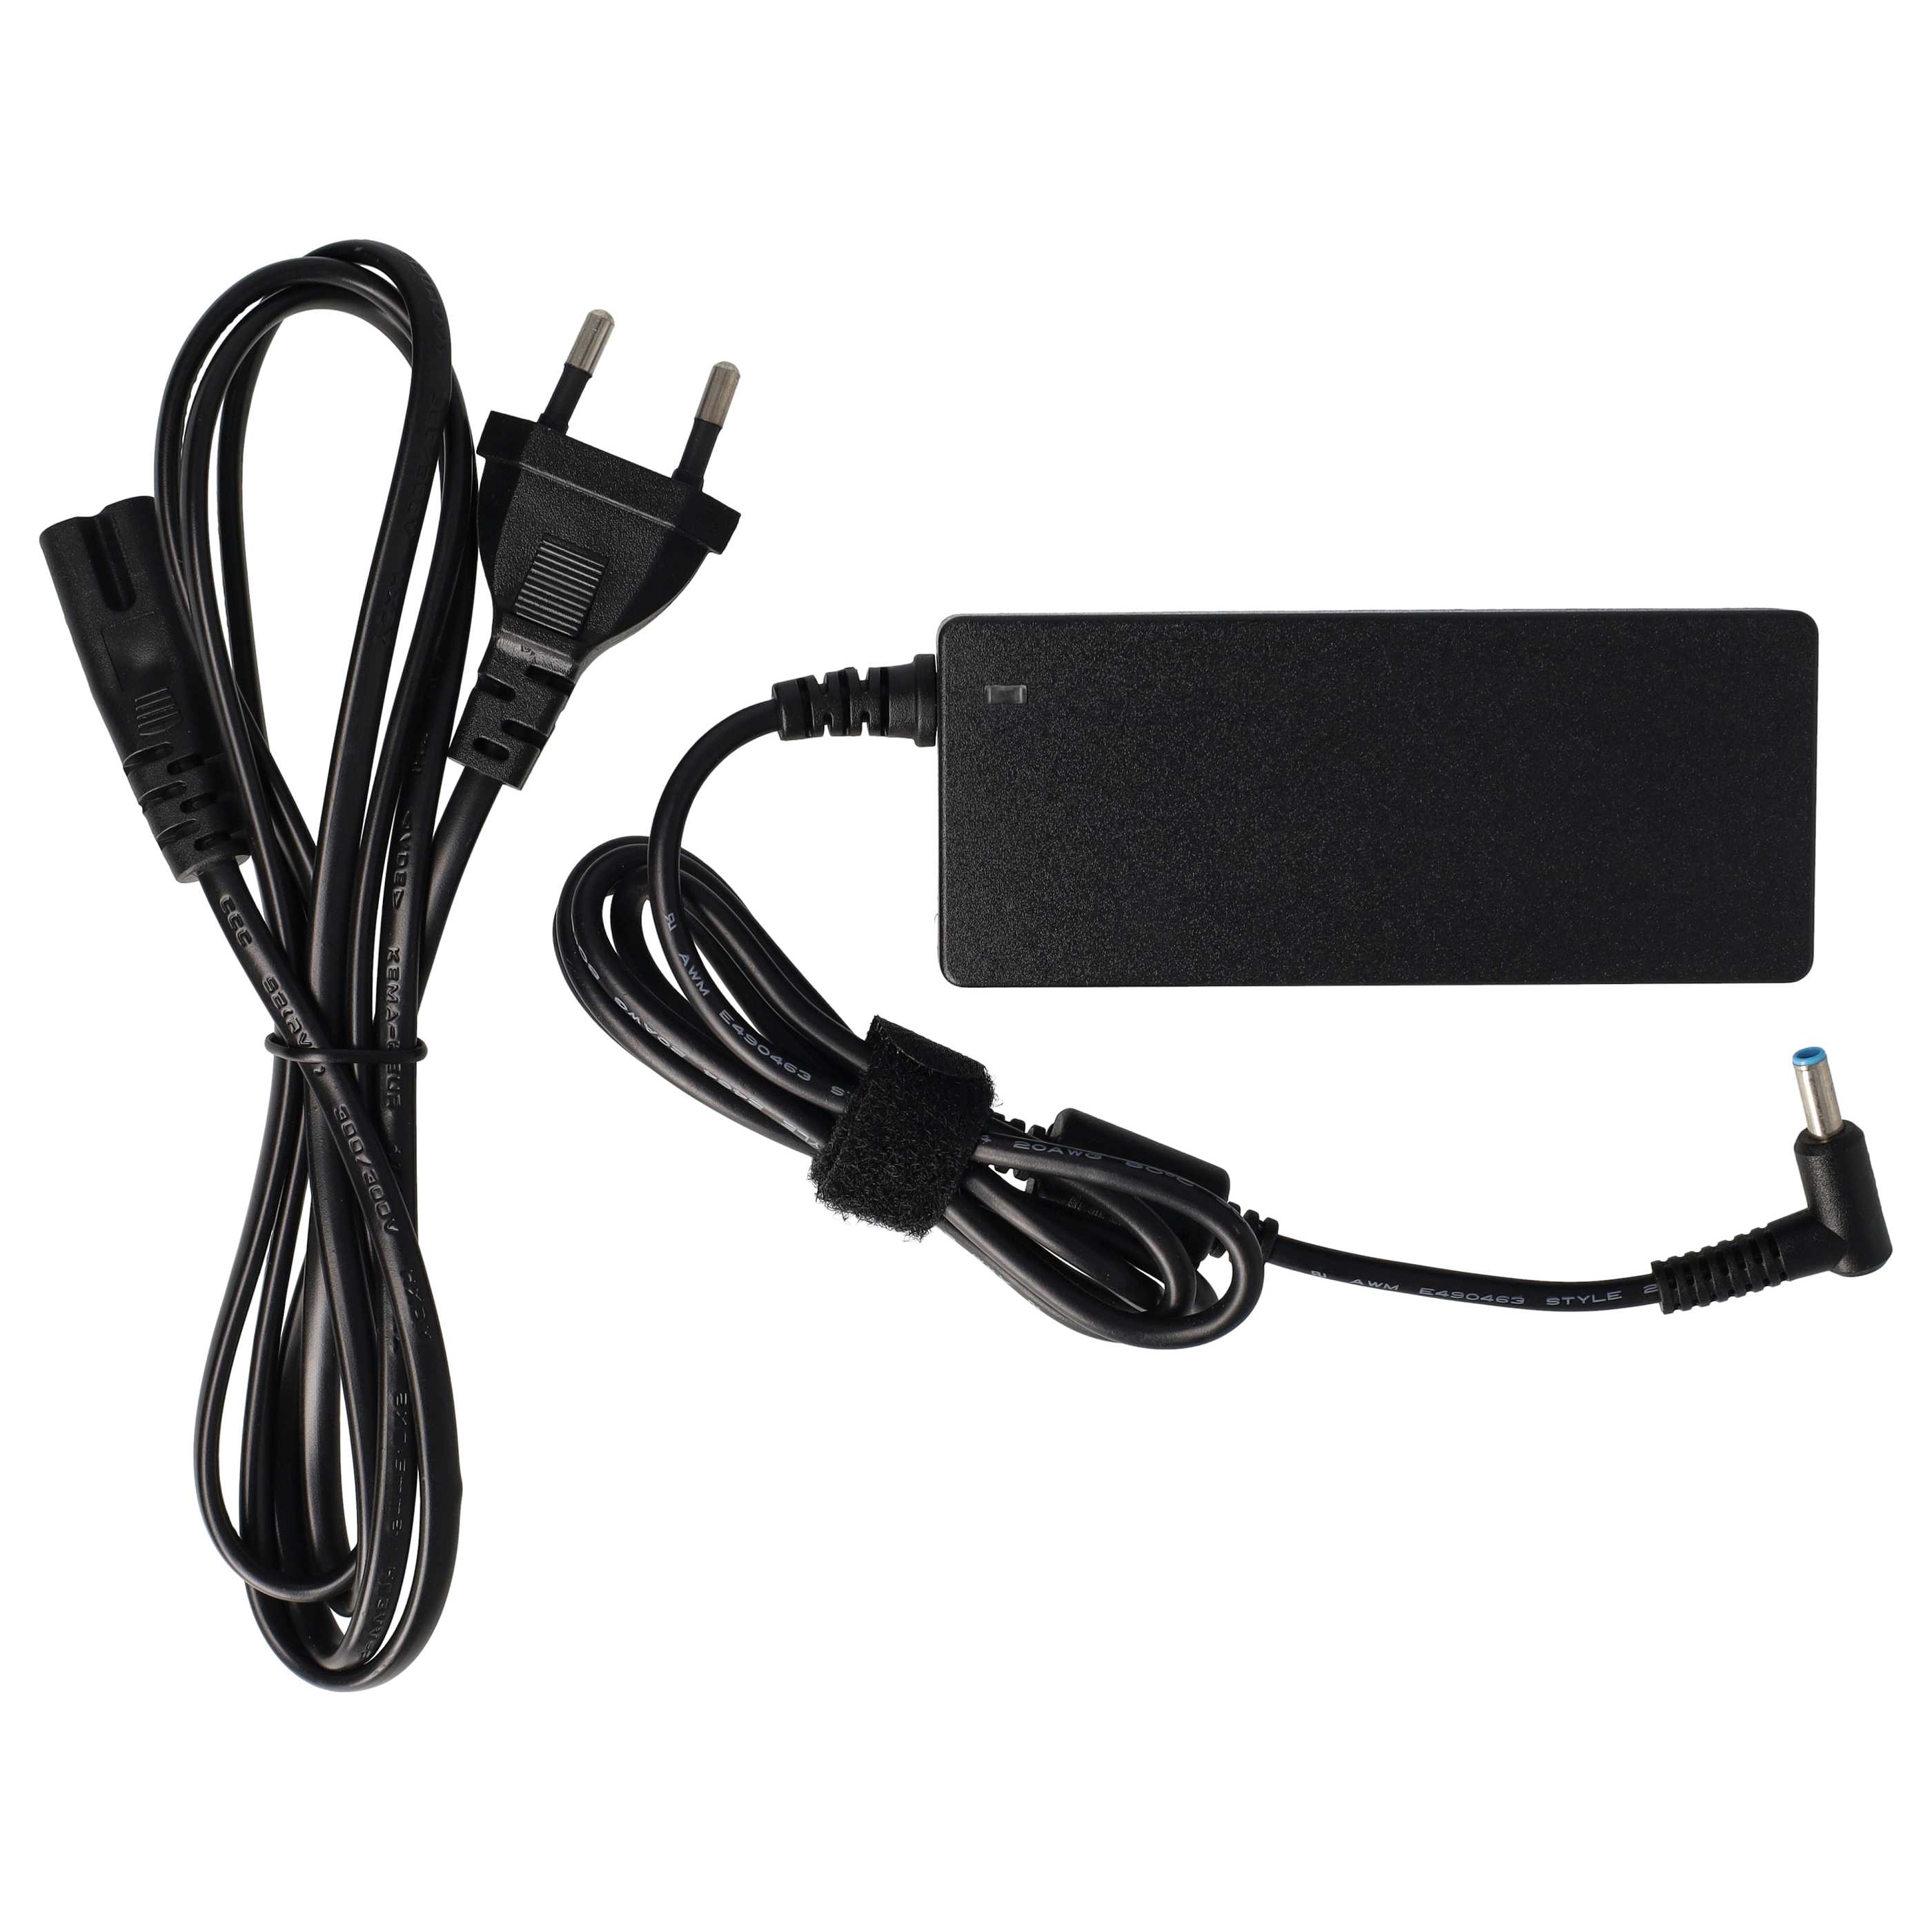 Mains Power Adapter replaces HP PP009C for DellNotebook etc., 65 W